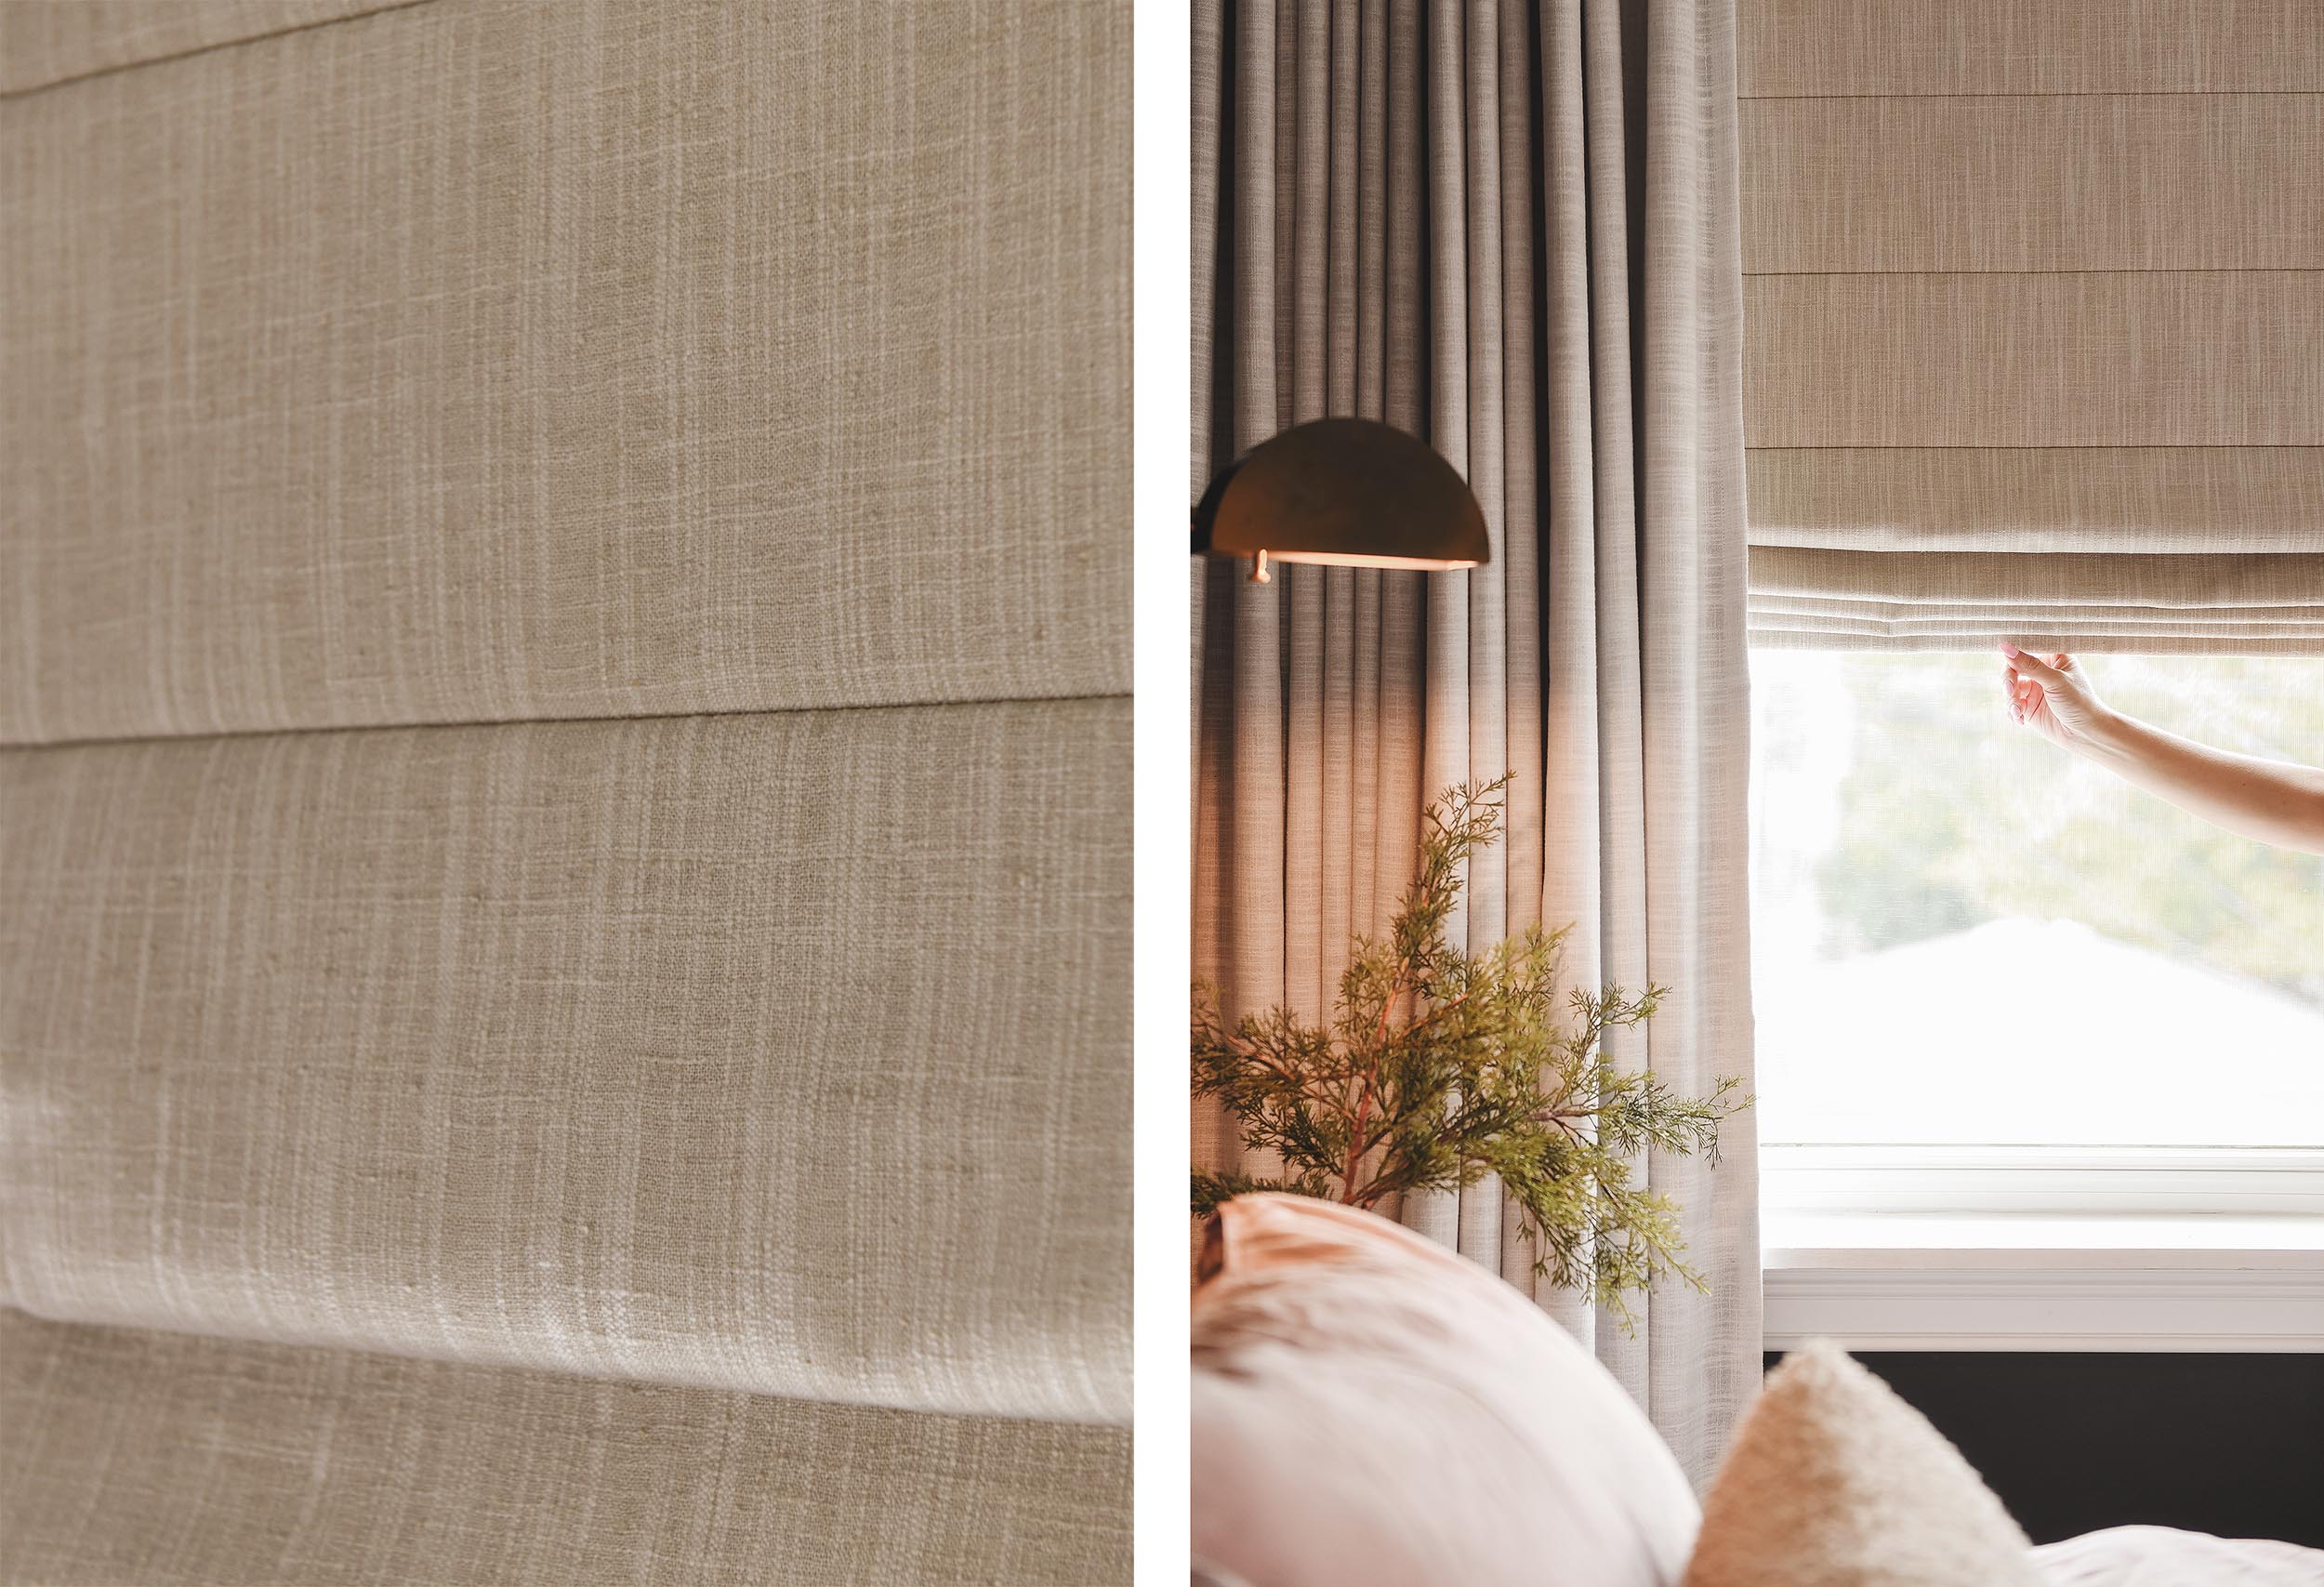 Details of the Tailored Roman shades in our Chicago primary bedroom // via Yellow Brick Home